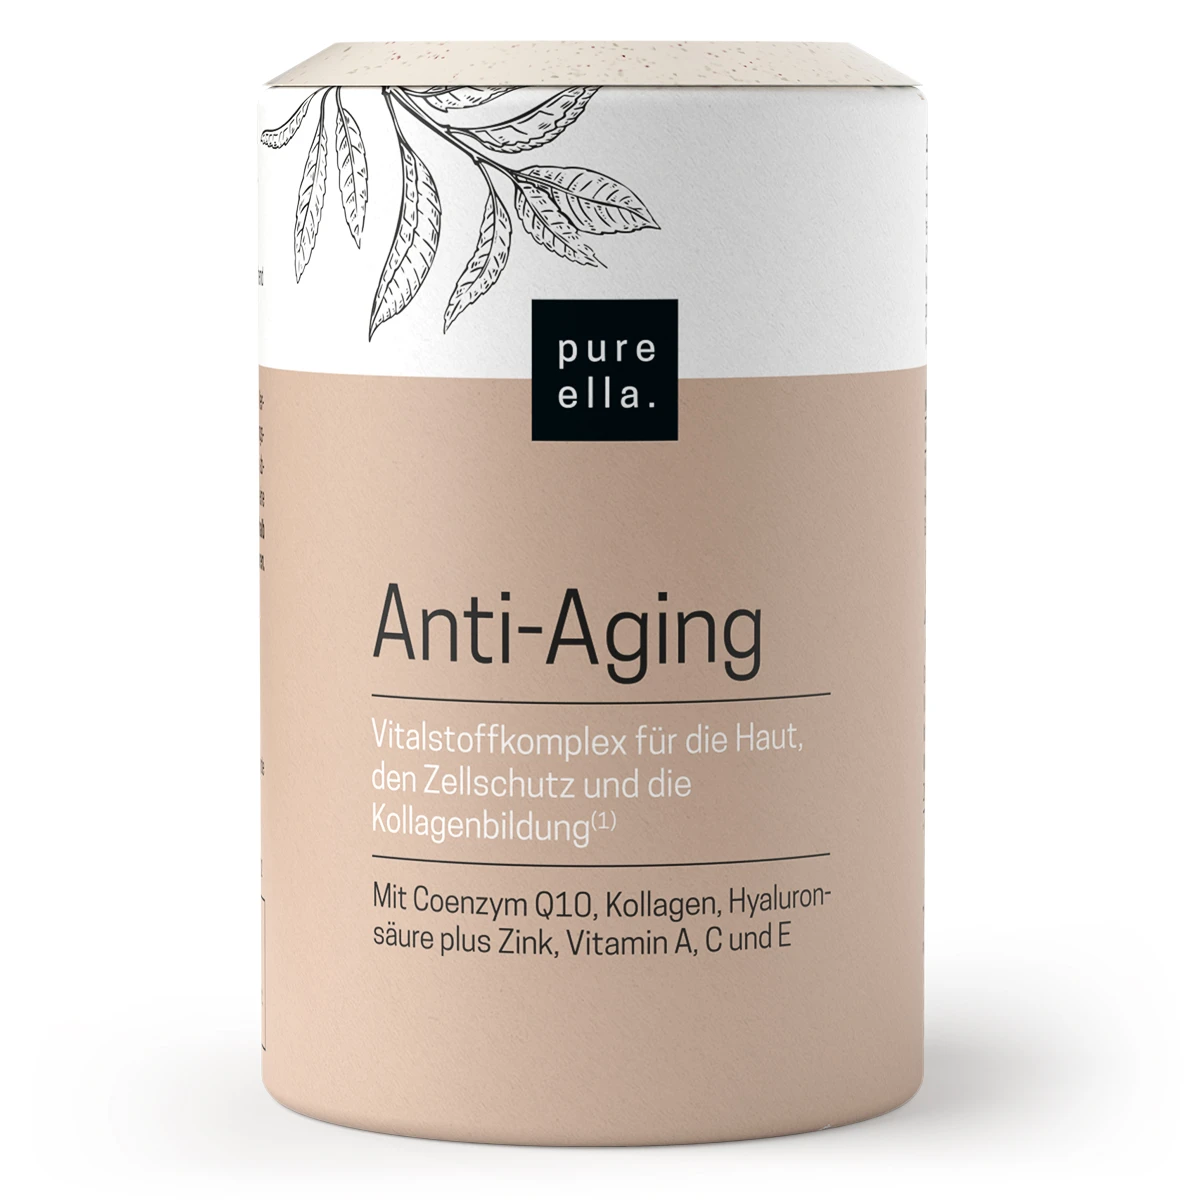 A822-Anti-Aging-19061470-01-Produkt-1200px